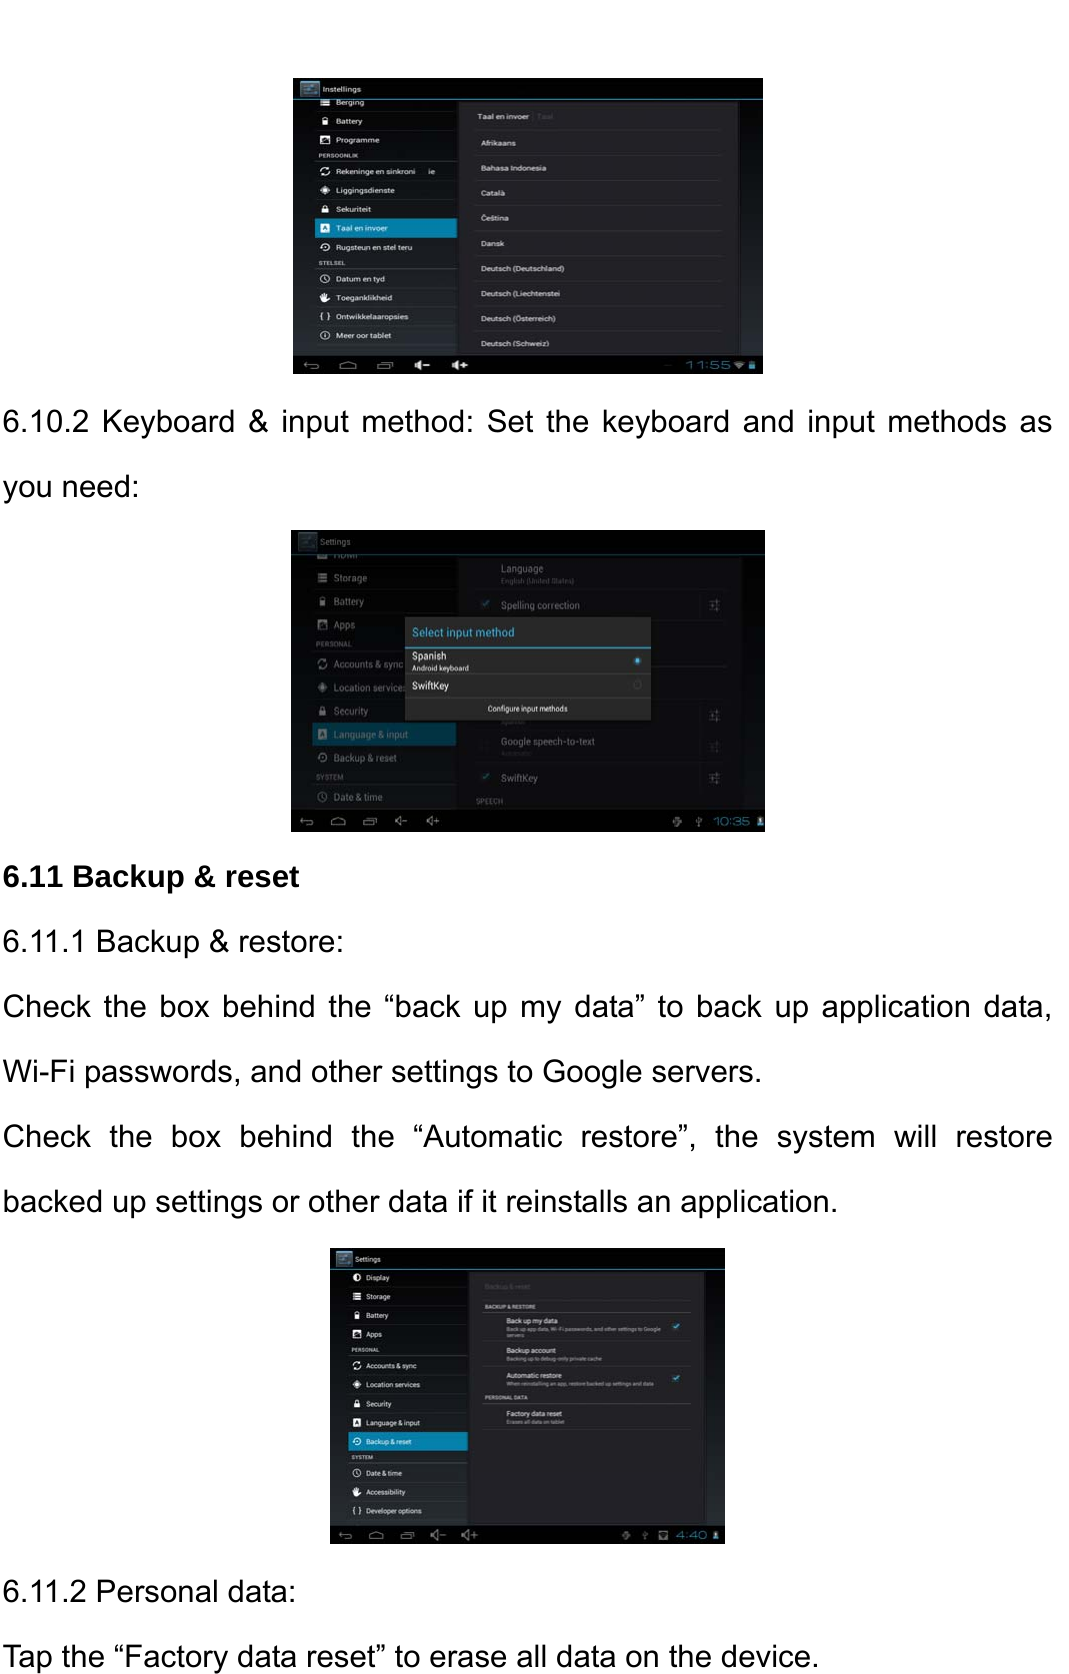     6.10.2 Keyboard &amp; input method: Set the keyboard and input methods as you need:    6.11 Backup &amp; reset 6.11.1 Backup &amp; restore:   Check the box behind the “back up my data” to back up application data, Wi-Fi passwords, and other settings to Google servers.   Check the box behind the “Automatic restore”, the system will restore backed up settings or other data if it reinstalls an application.    6.11.2 Personal data:   Tap the “Factory data reset” to erase all data on the device.   